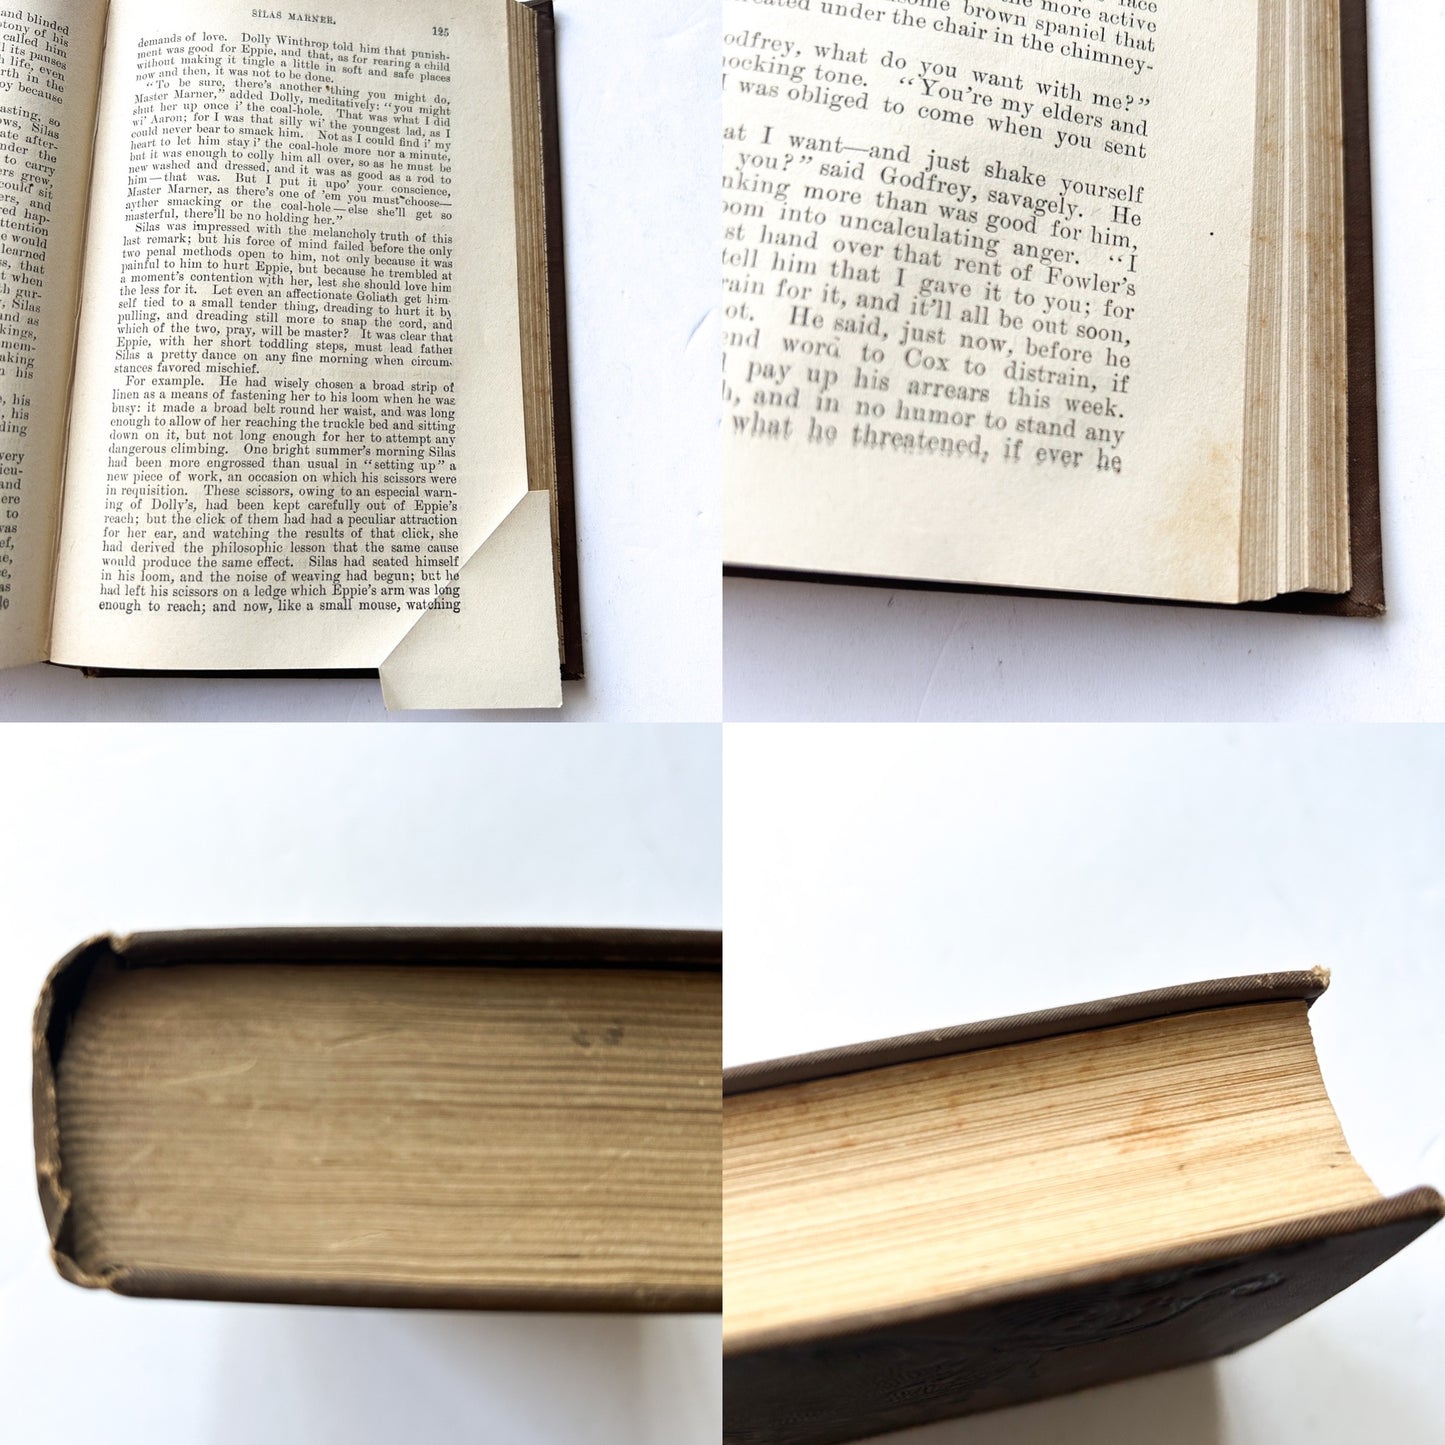 Antique Book, Eliot's Works by George Eliot, incl. The Mill on the Floss, Silas Marner